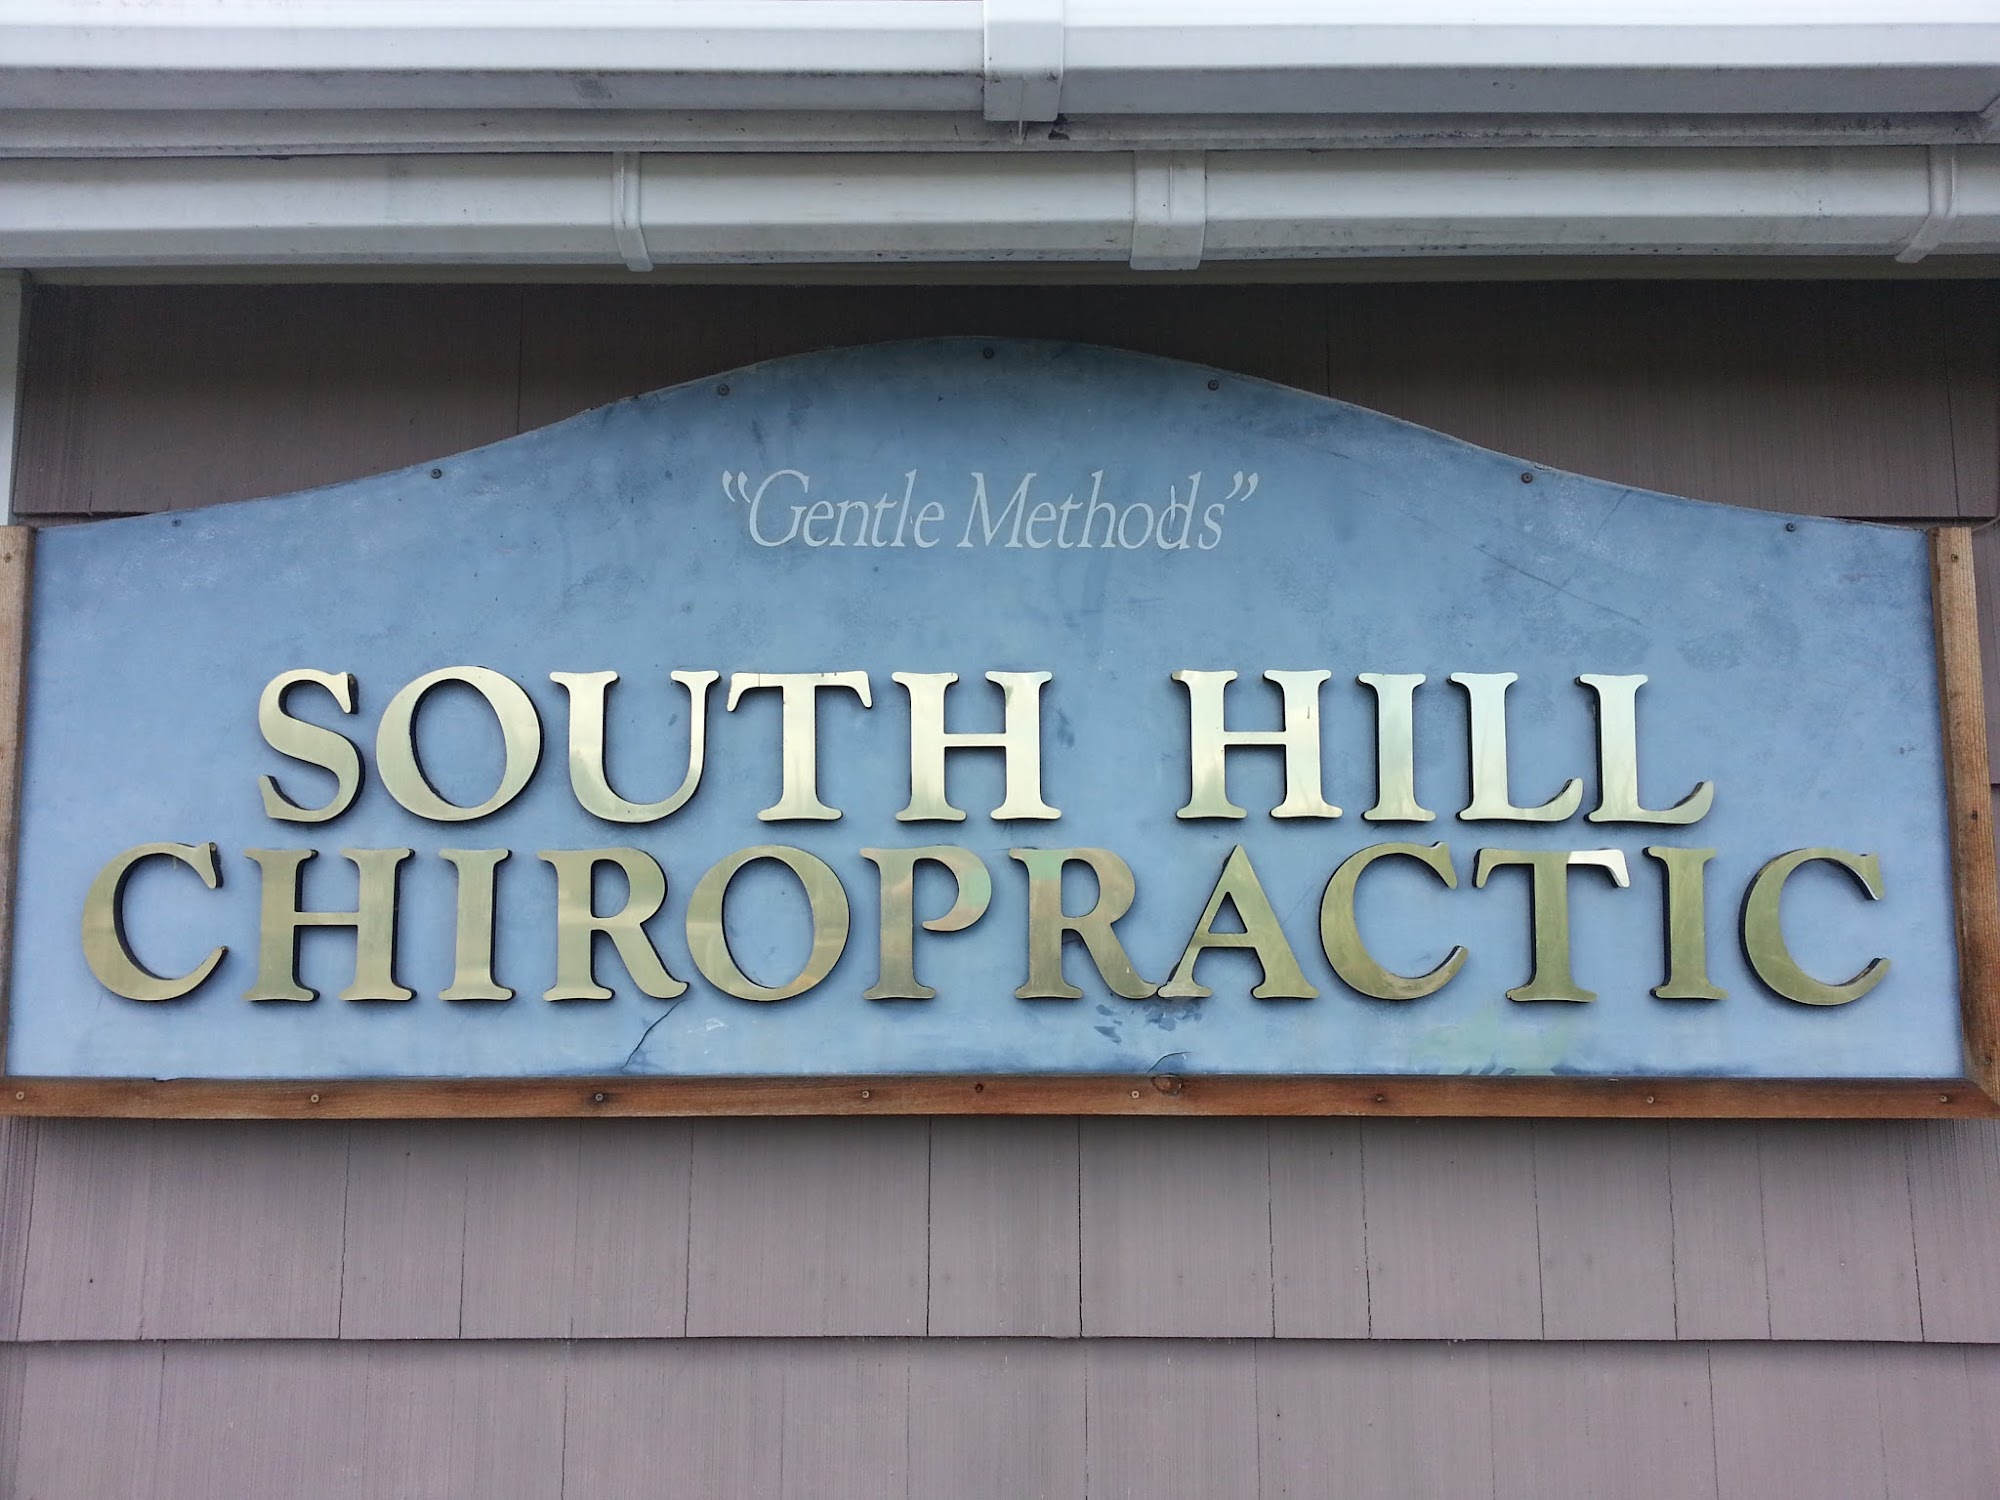 South Hill Chiropractic